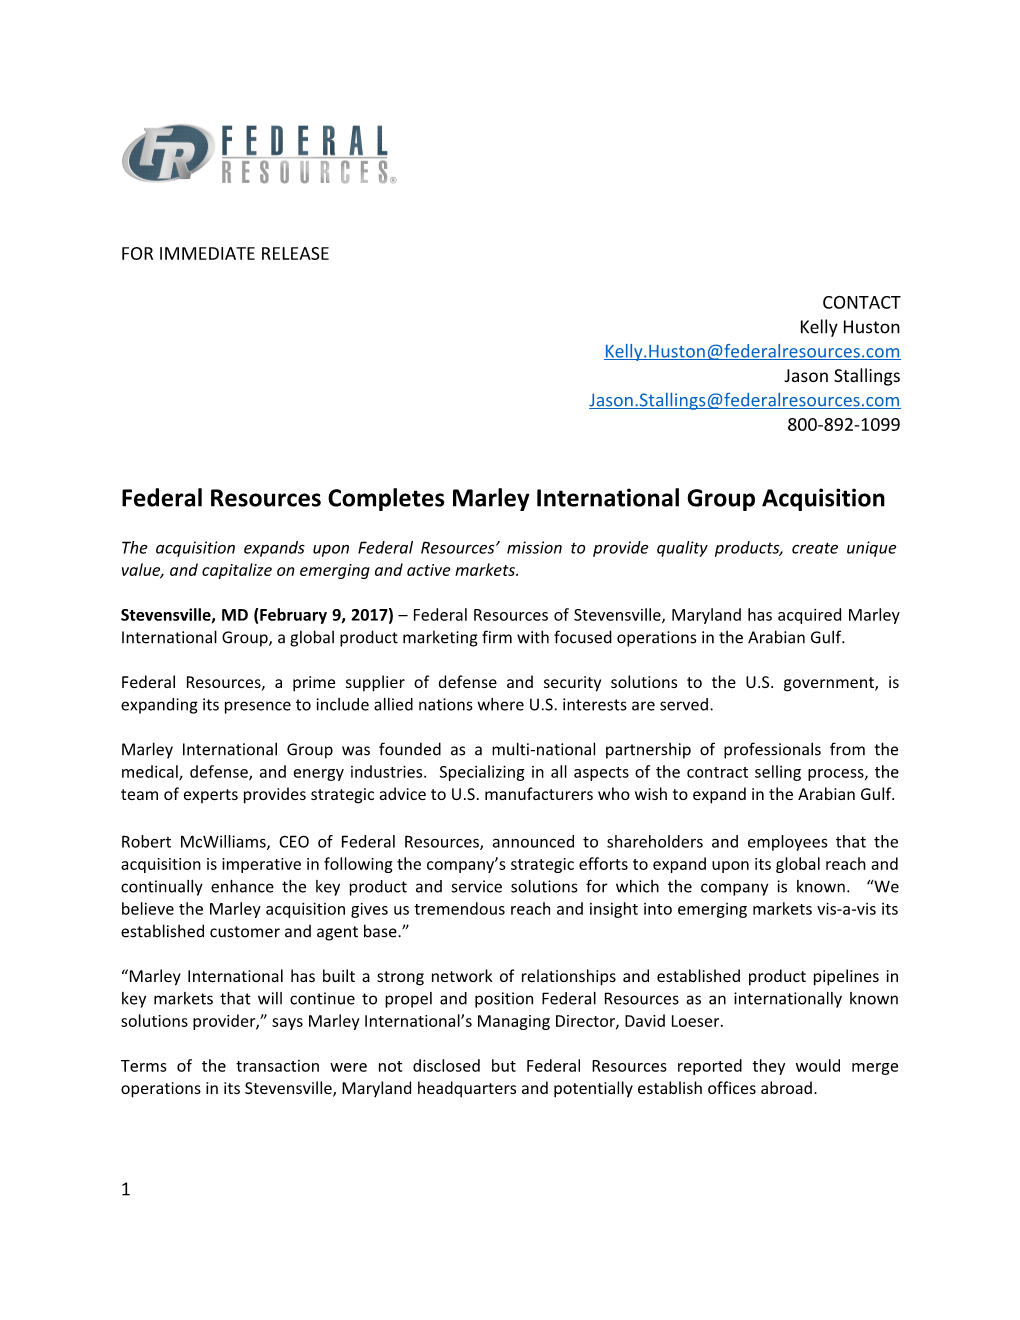 Federal Resources Completes Marley International Group Acquisition